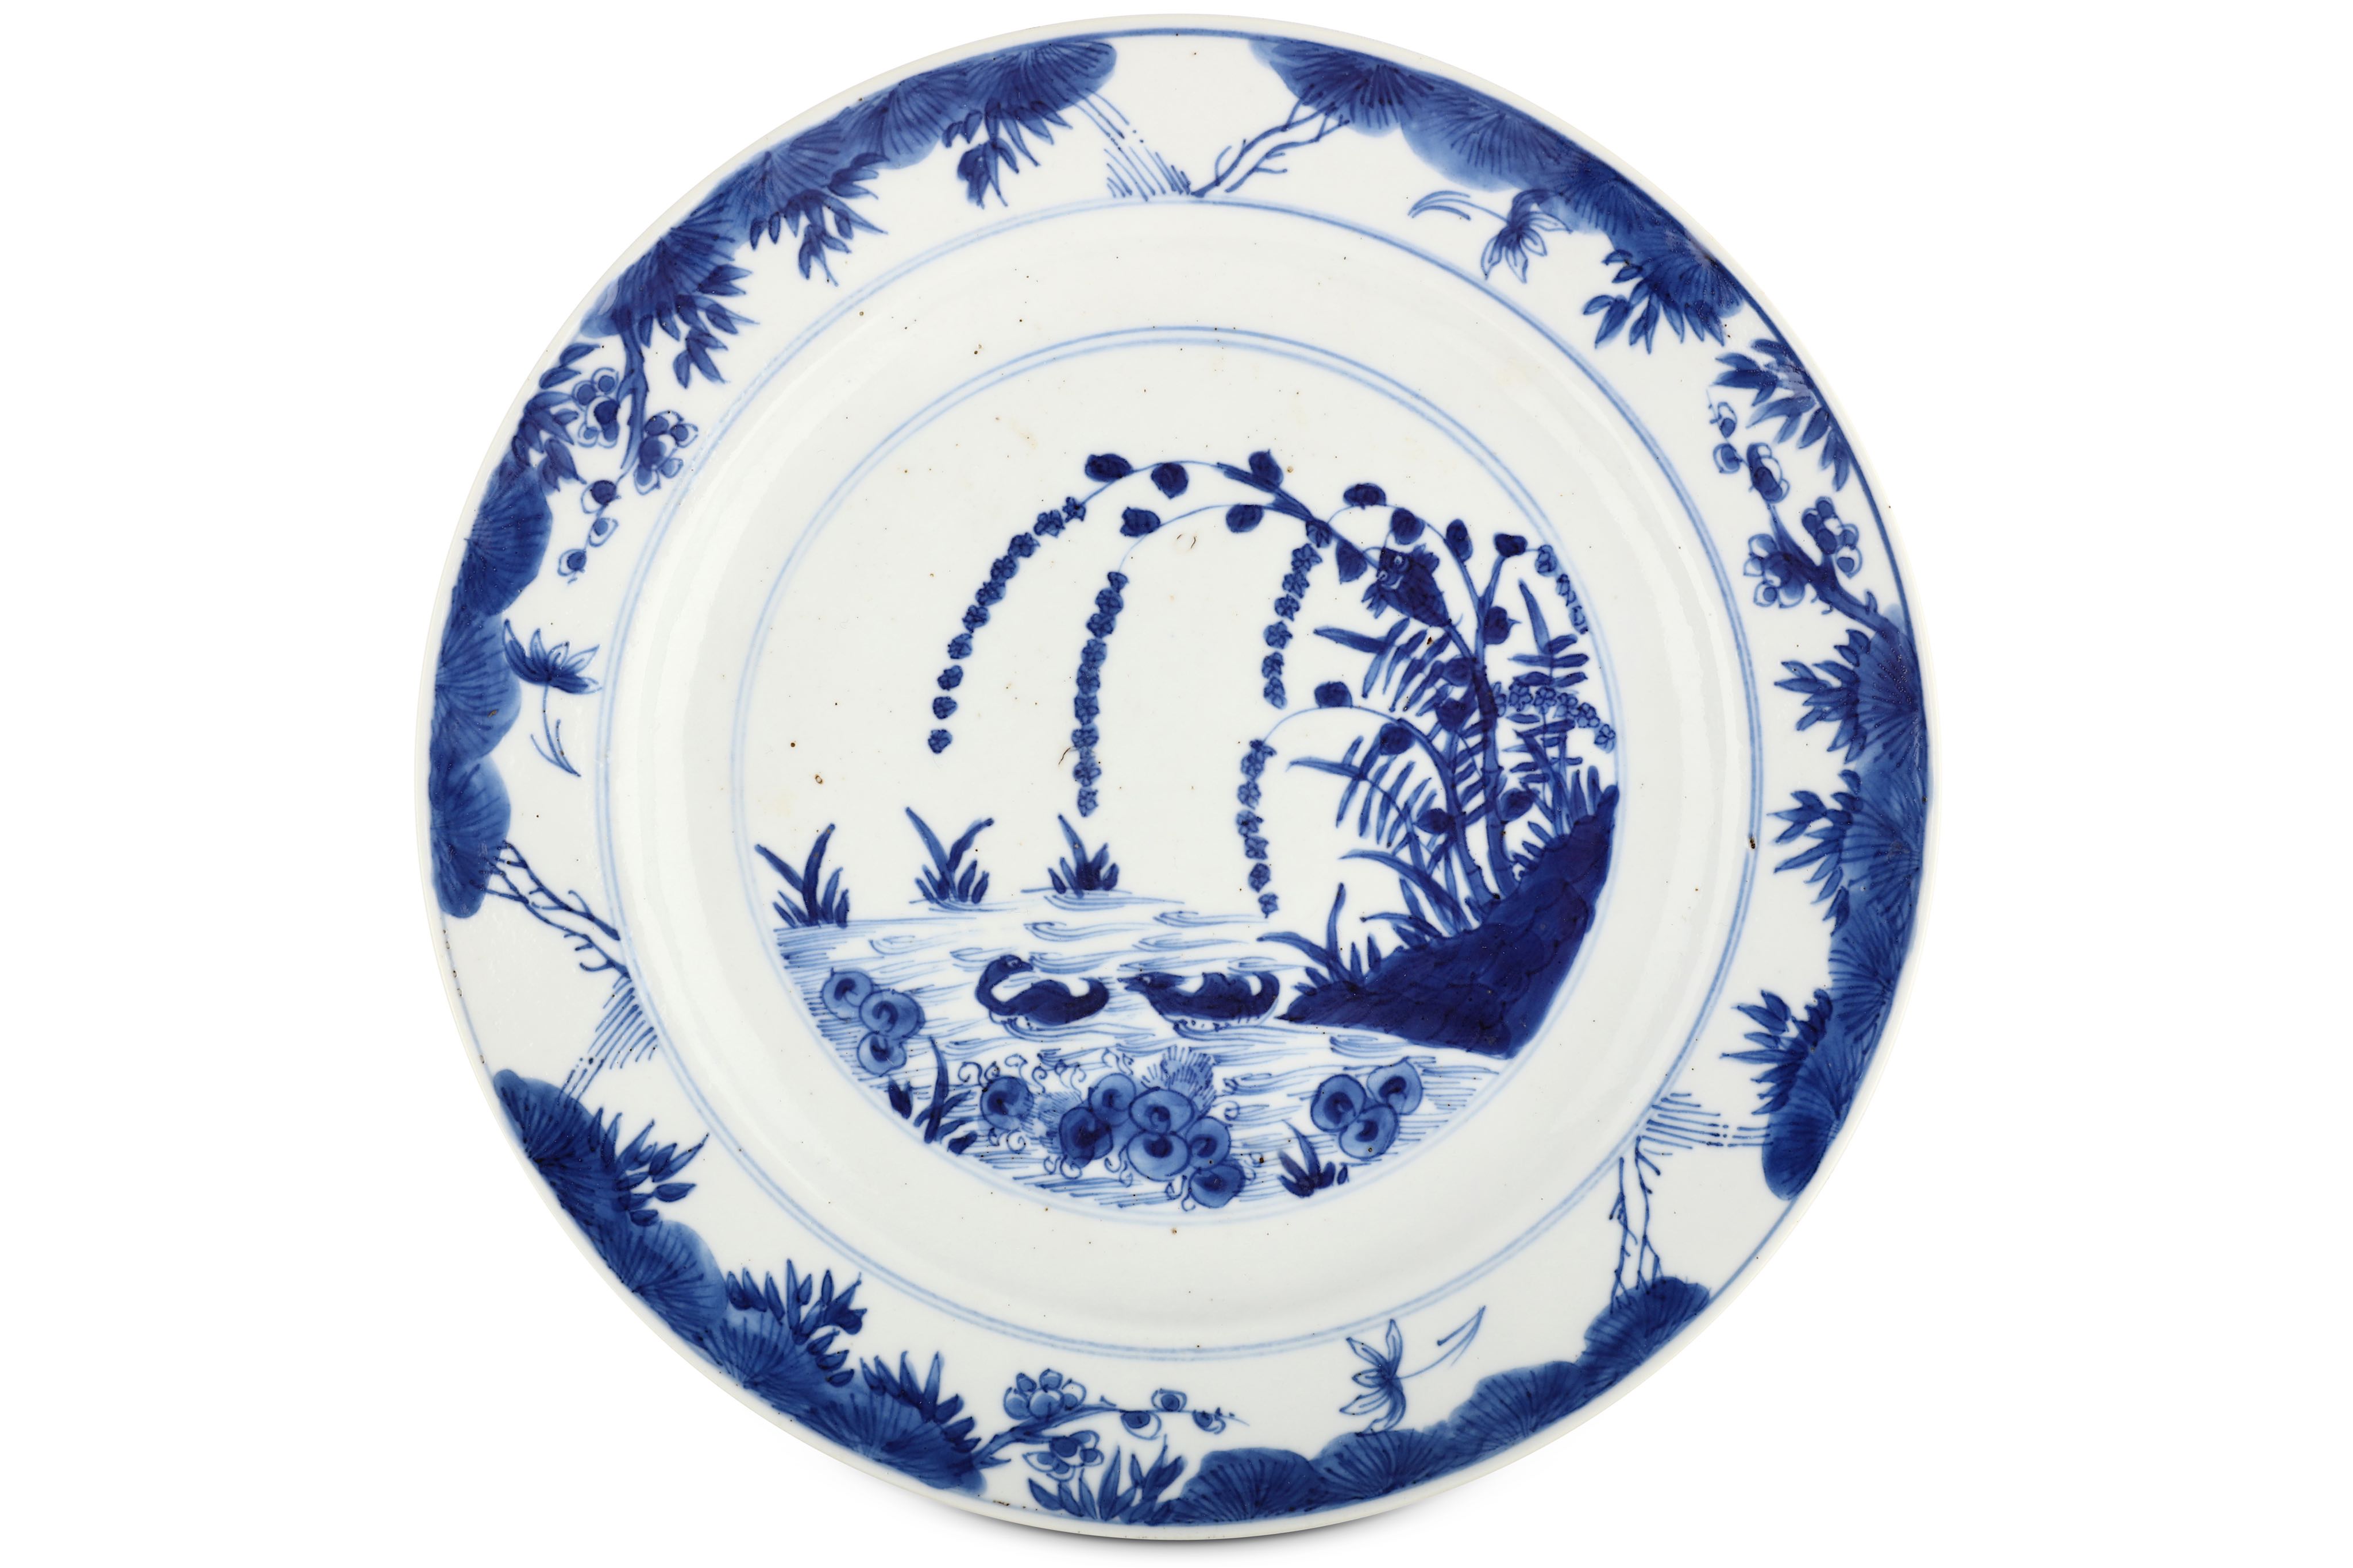 A CHINESE BLUE AND WHITE ‘MANDARIN DUCKS’ DISH. Kangxi mark and of the period. Painted with a